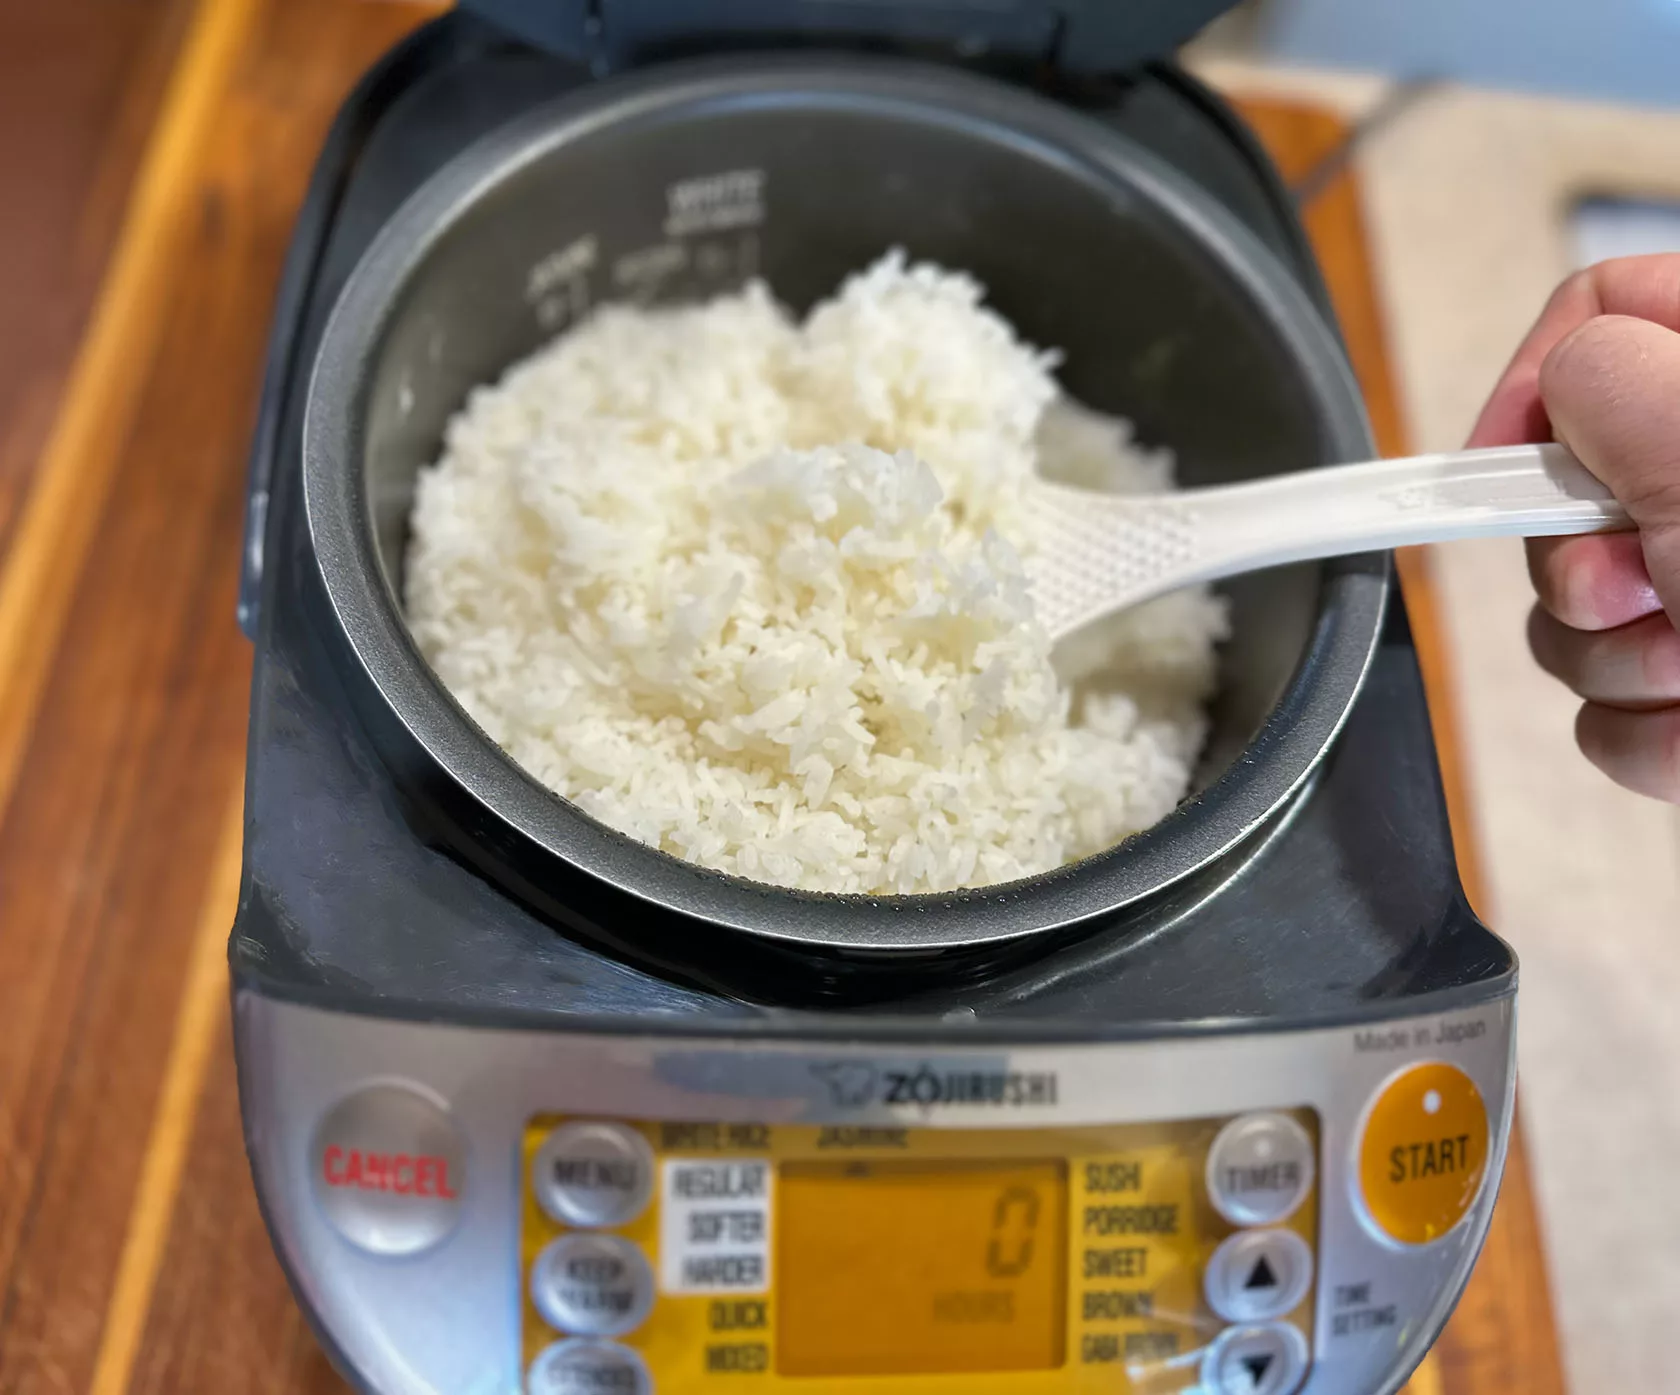 https://www.sizzleandsear.com/wp-content/uploads/2023/07/zojirushi-induction-rice-cooker-review-jpg.webp